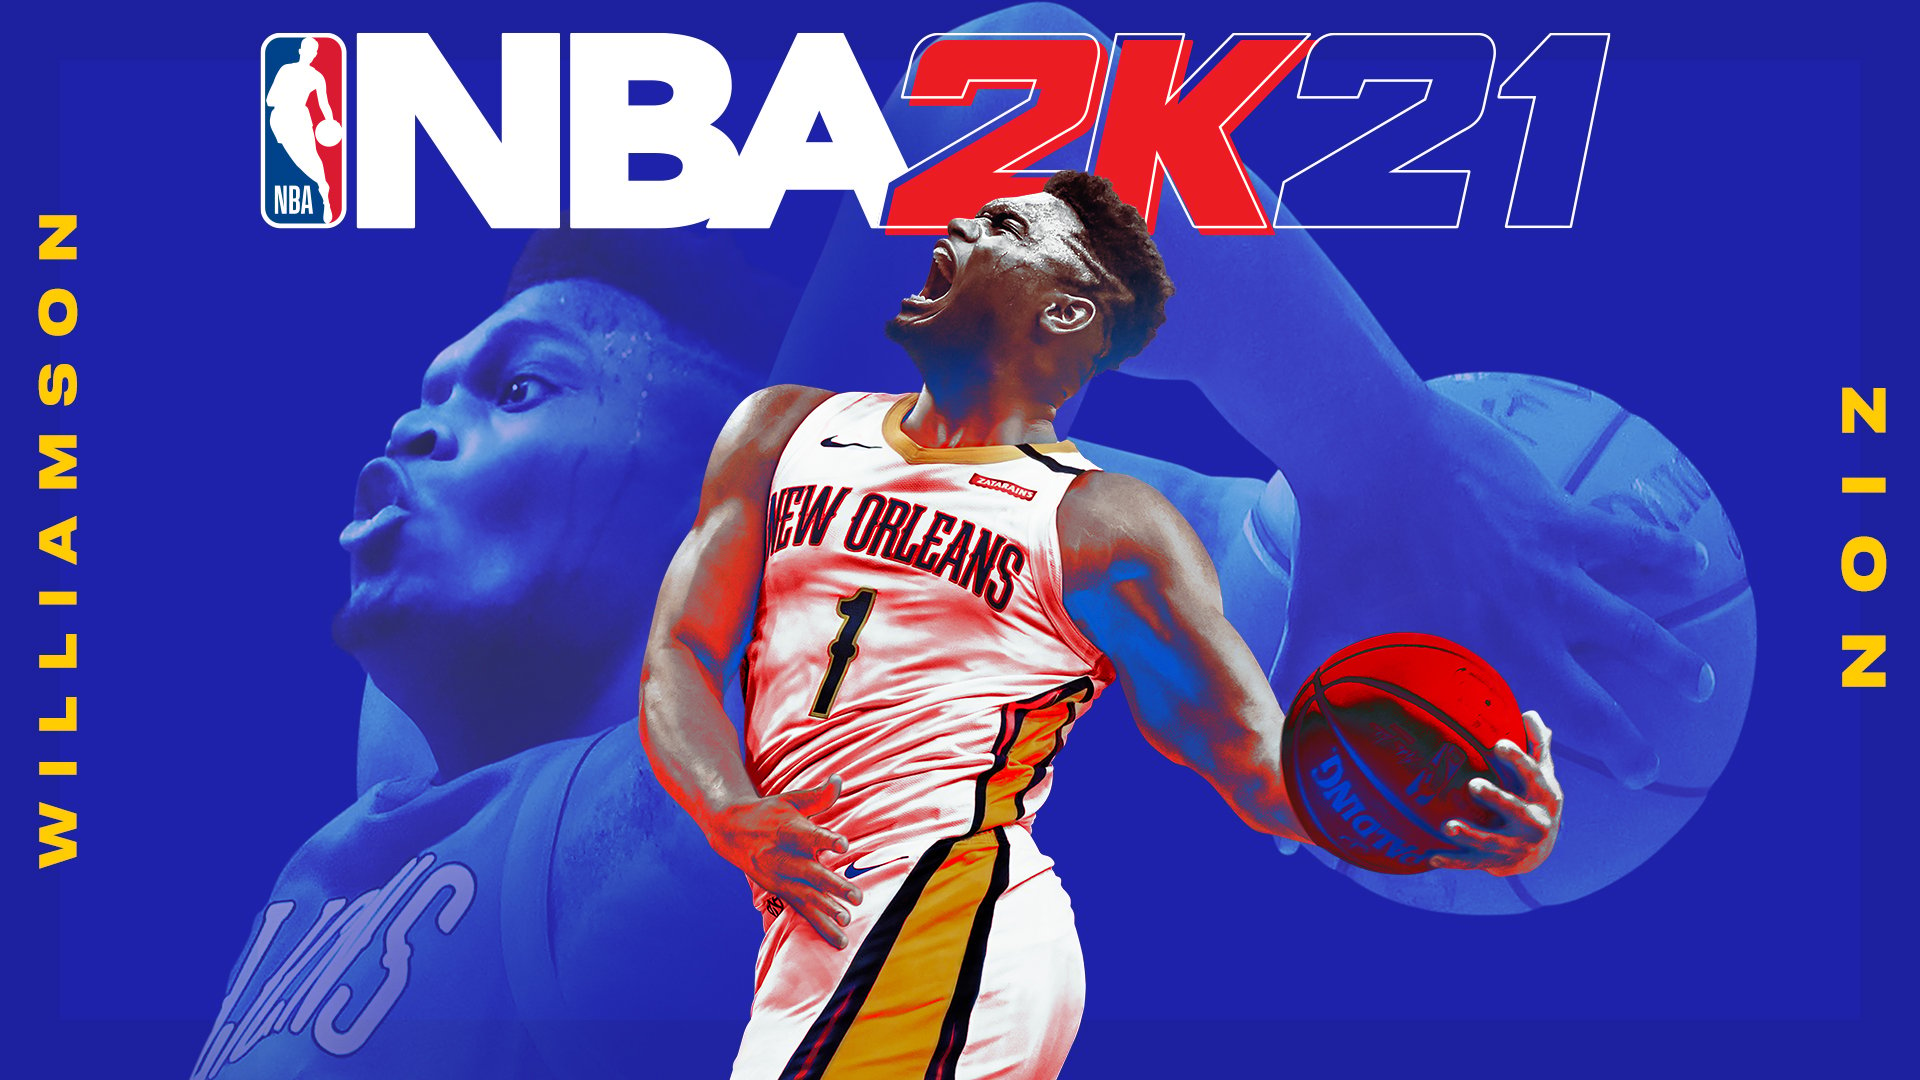 Build Your MyPlayer like Lebron James in NBA2K21